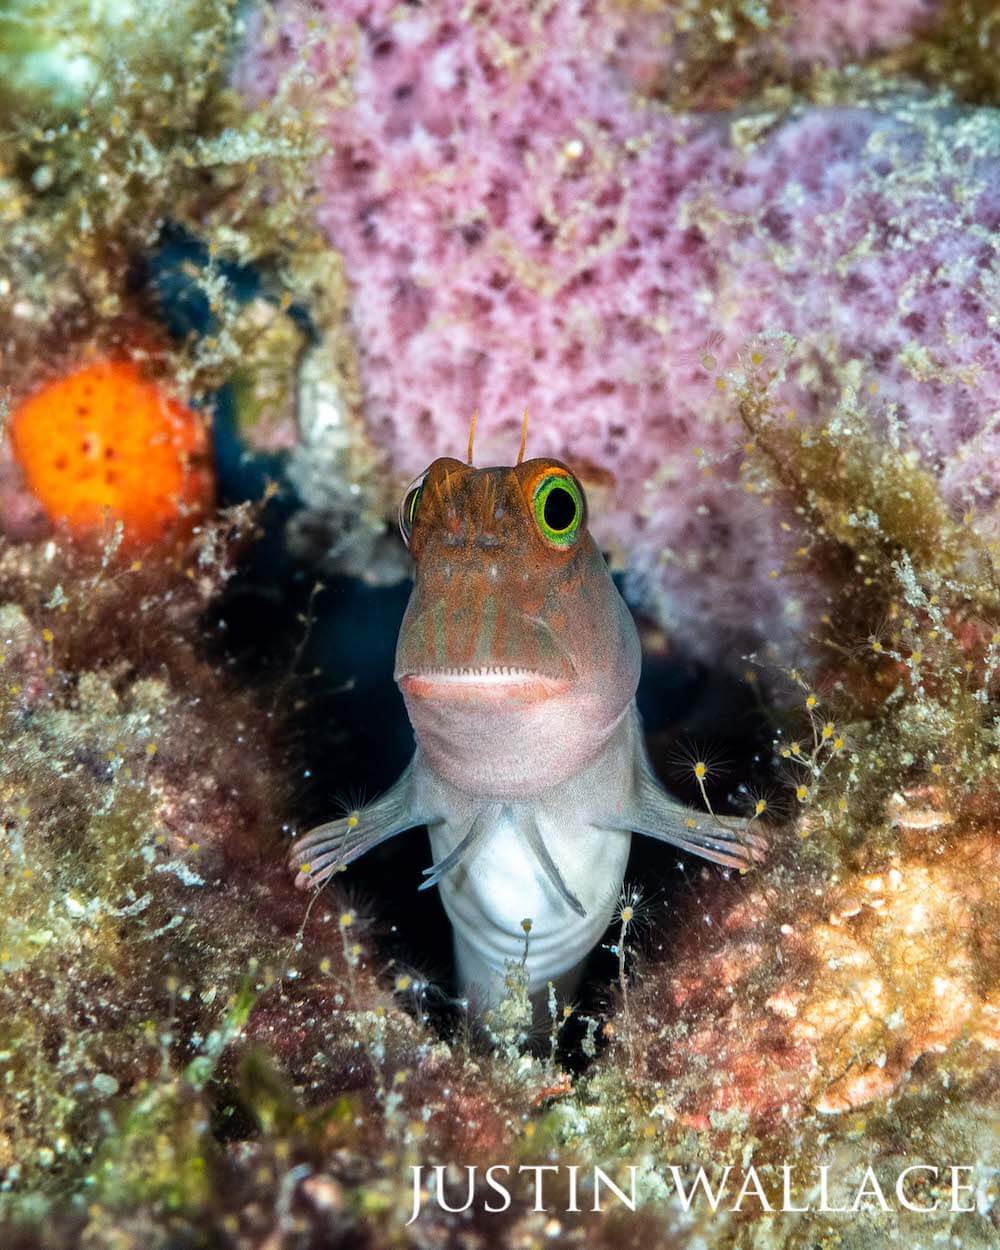 Blenny fish exiting its colorful and textured den.